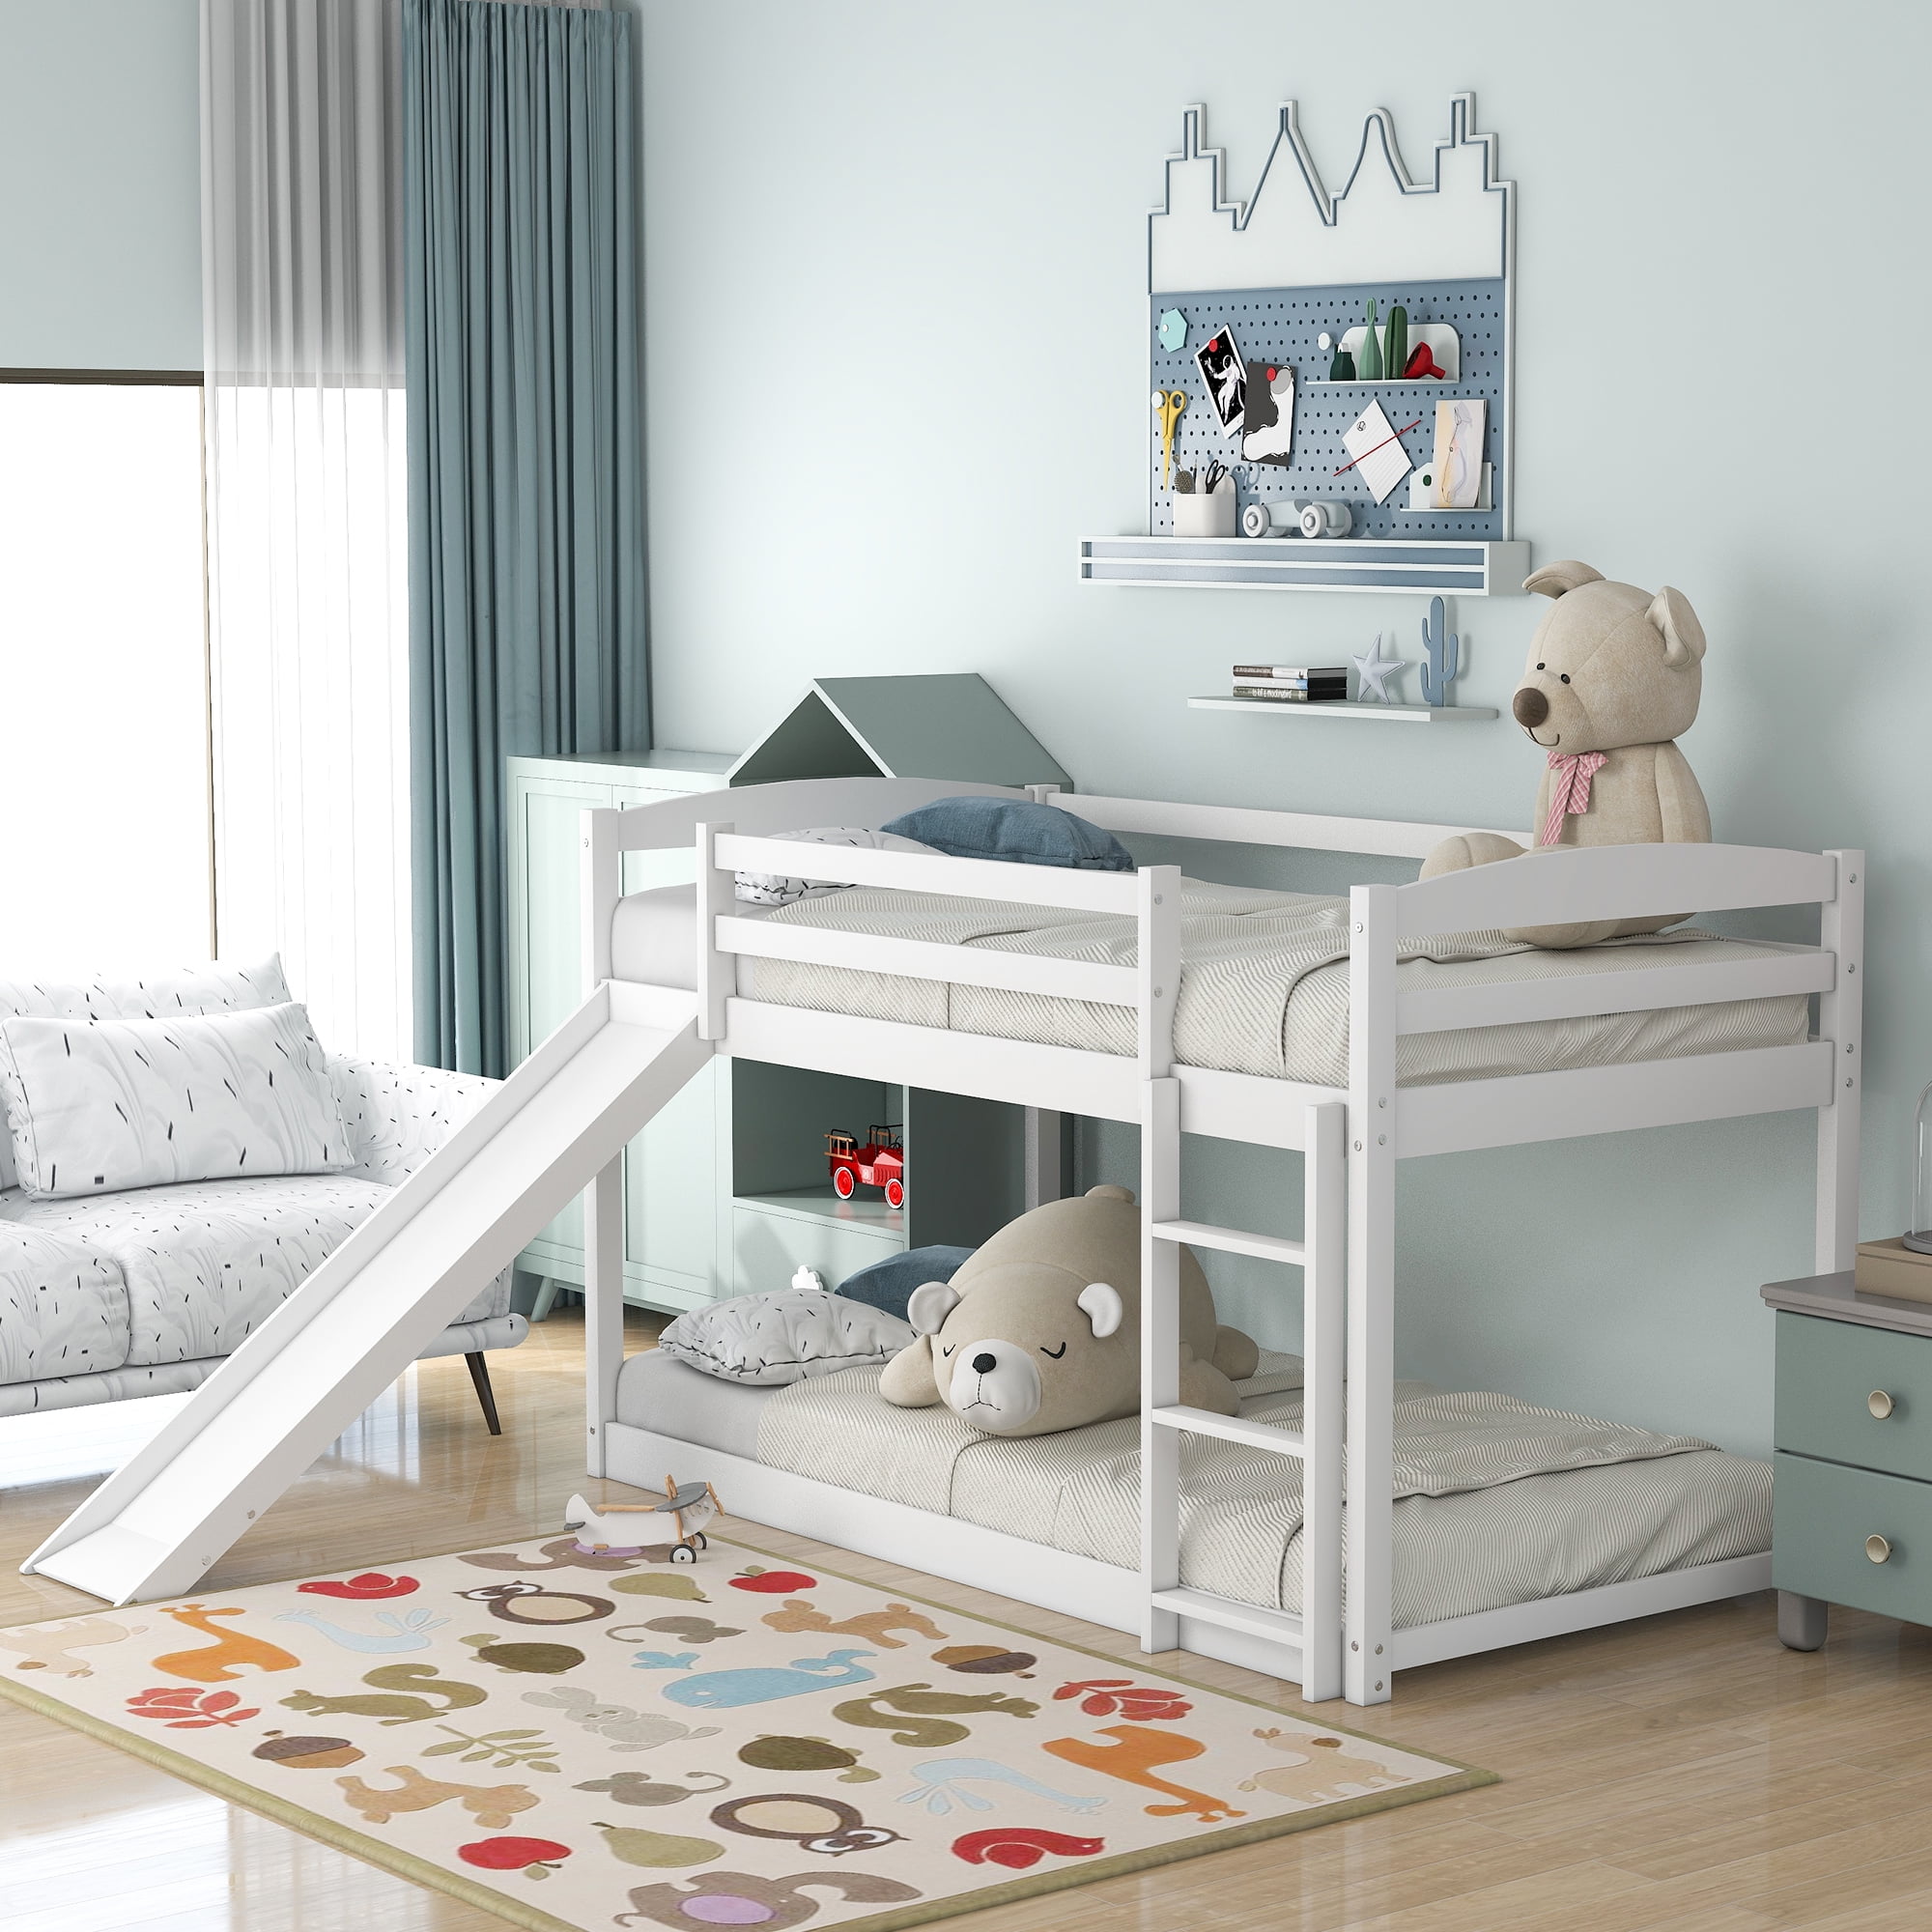 Meterk Twin Over Bunk Bed With, Wayfair White Twin Bunk Bedside Tables